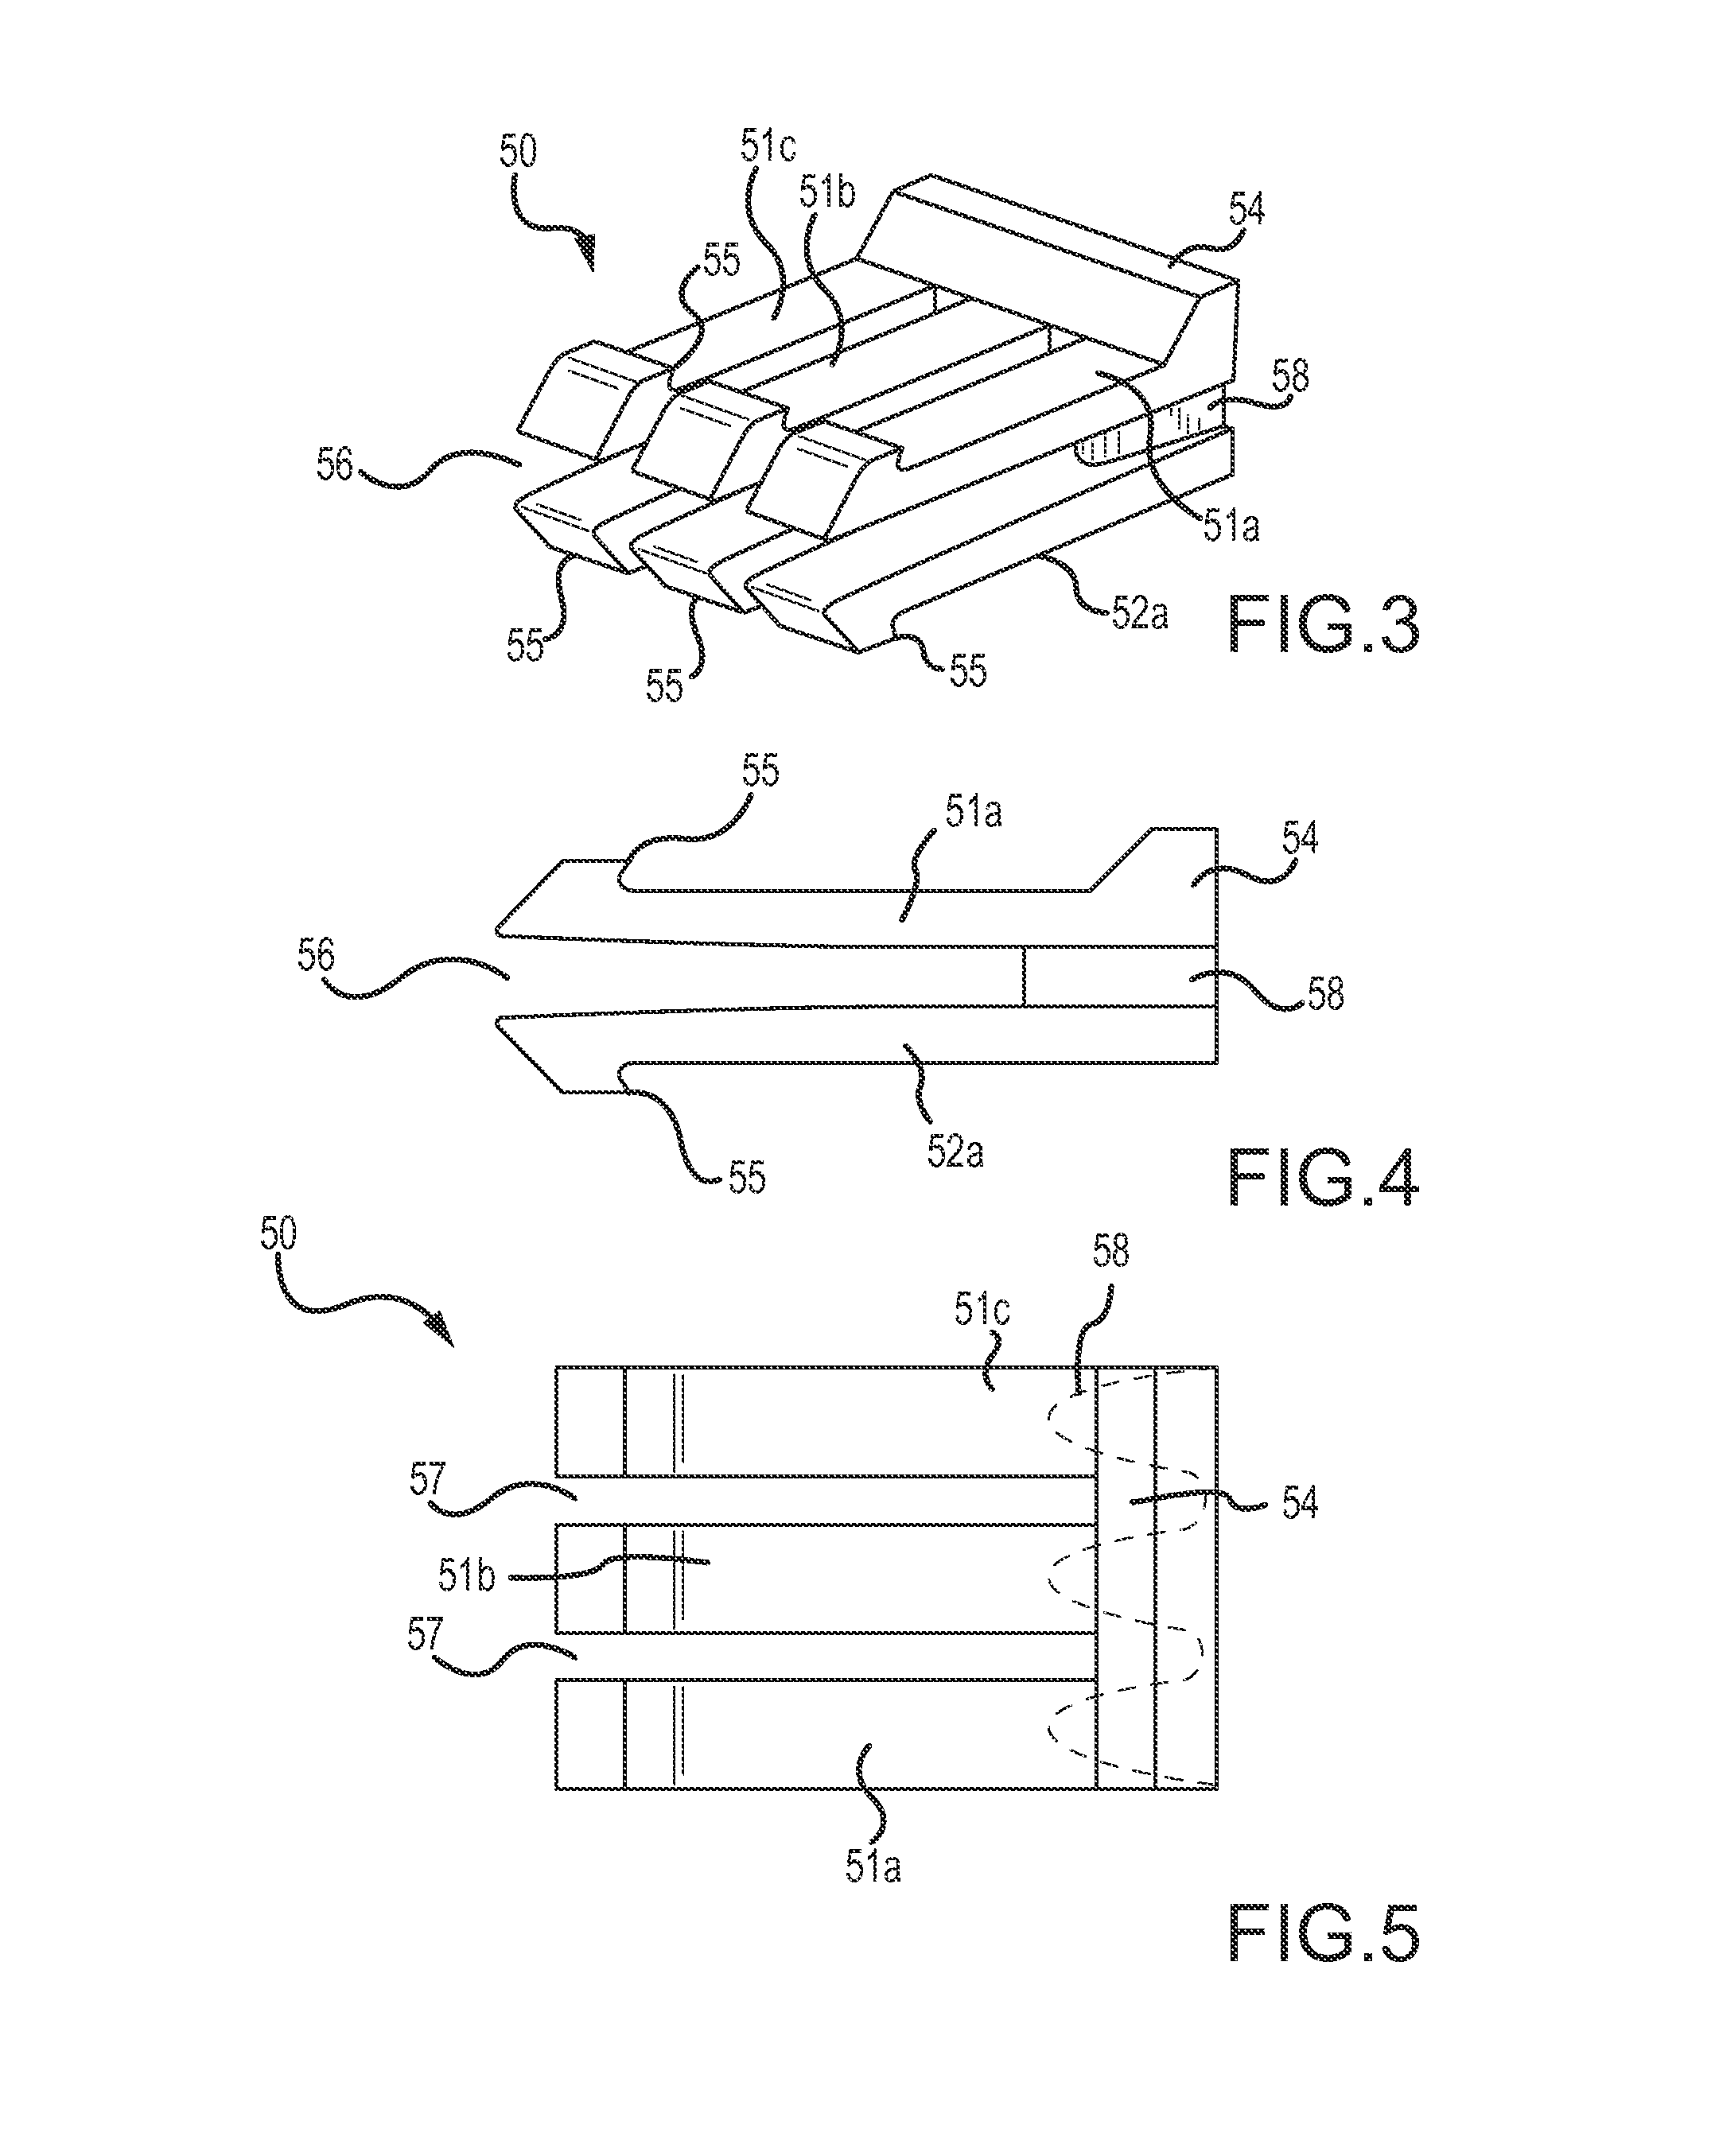 Mechanically stabilized earth retaining wall system and method of use